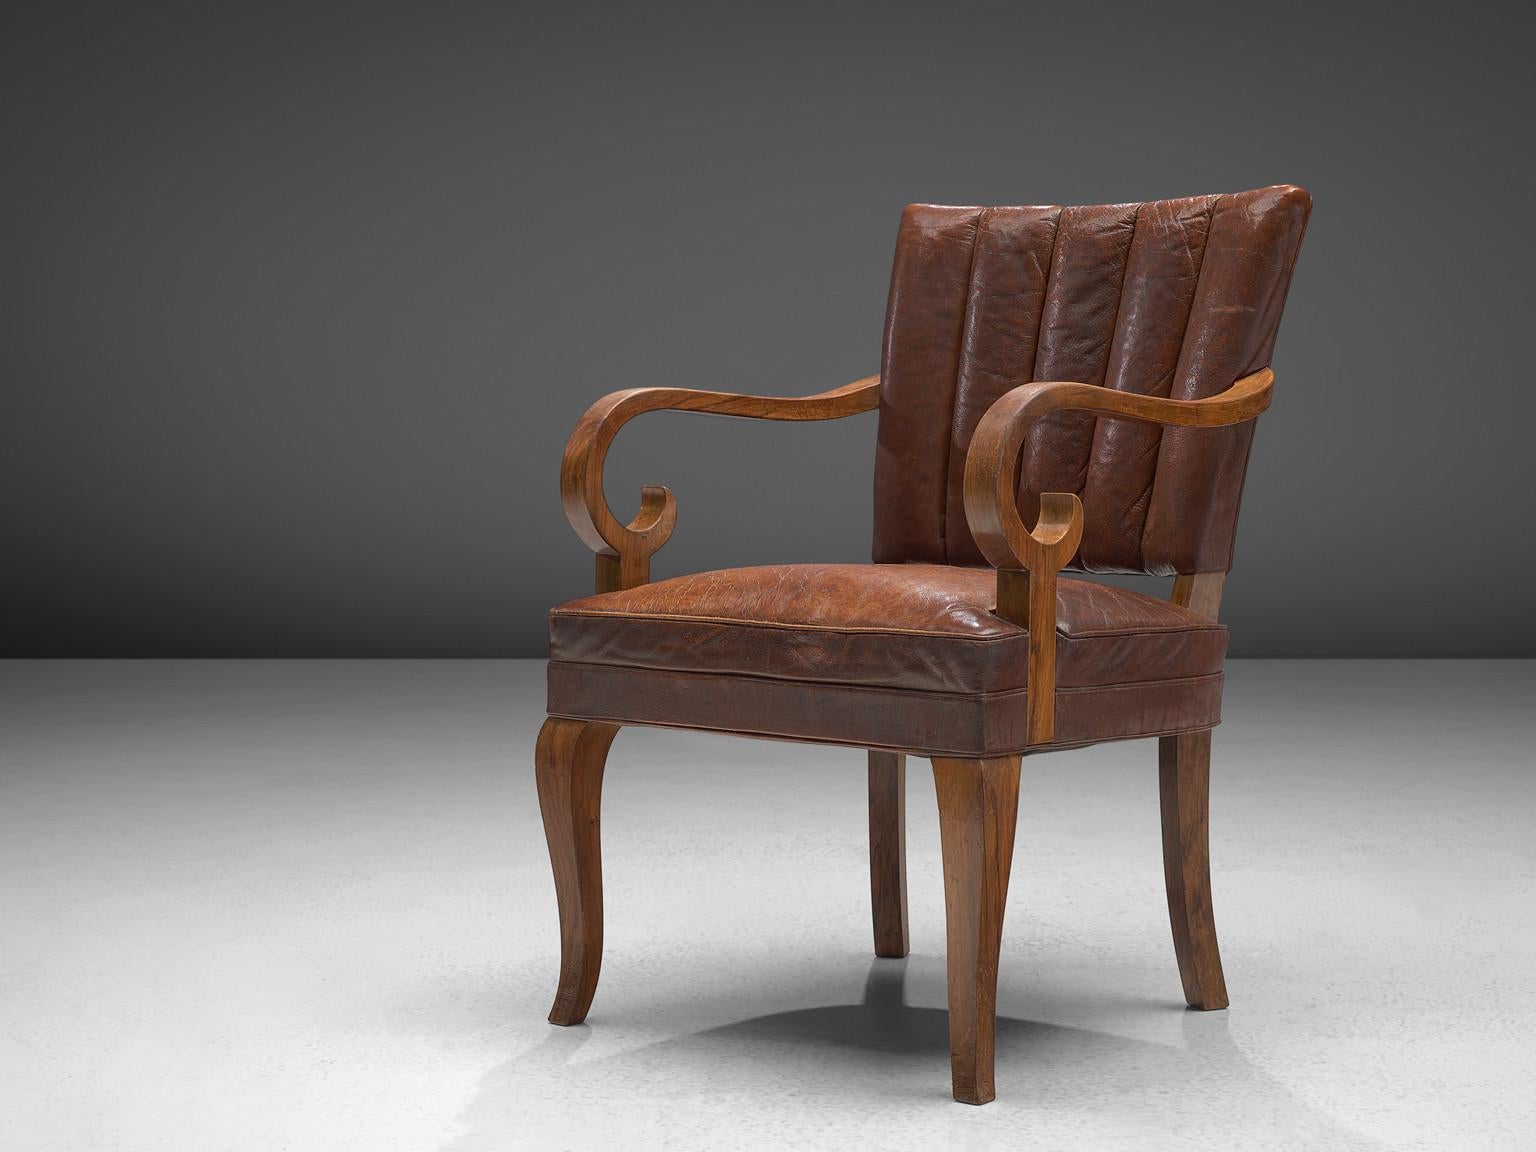 Armchair, leather and walnut, Denmark, 1940s.

This dining chair has incredible sensuous details. This is for instance visible in the swirling armrests or the tapered and curved legs. The lines in the chair are very sharp whereas the forms in